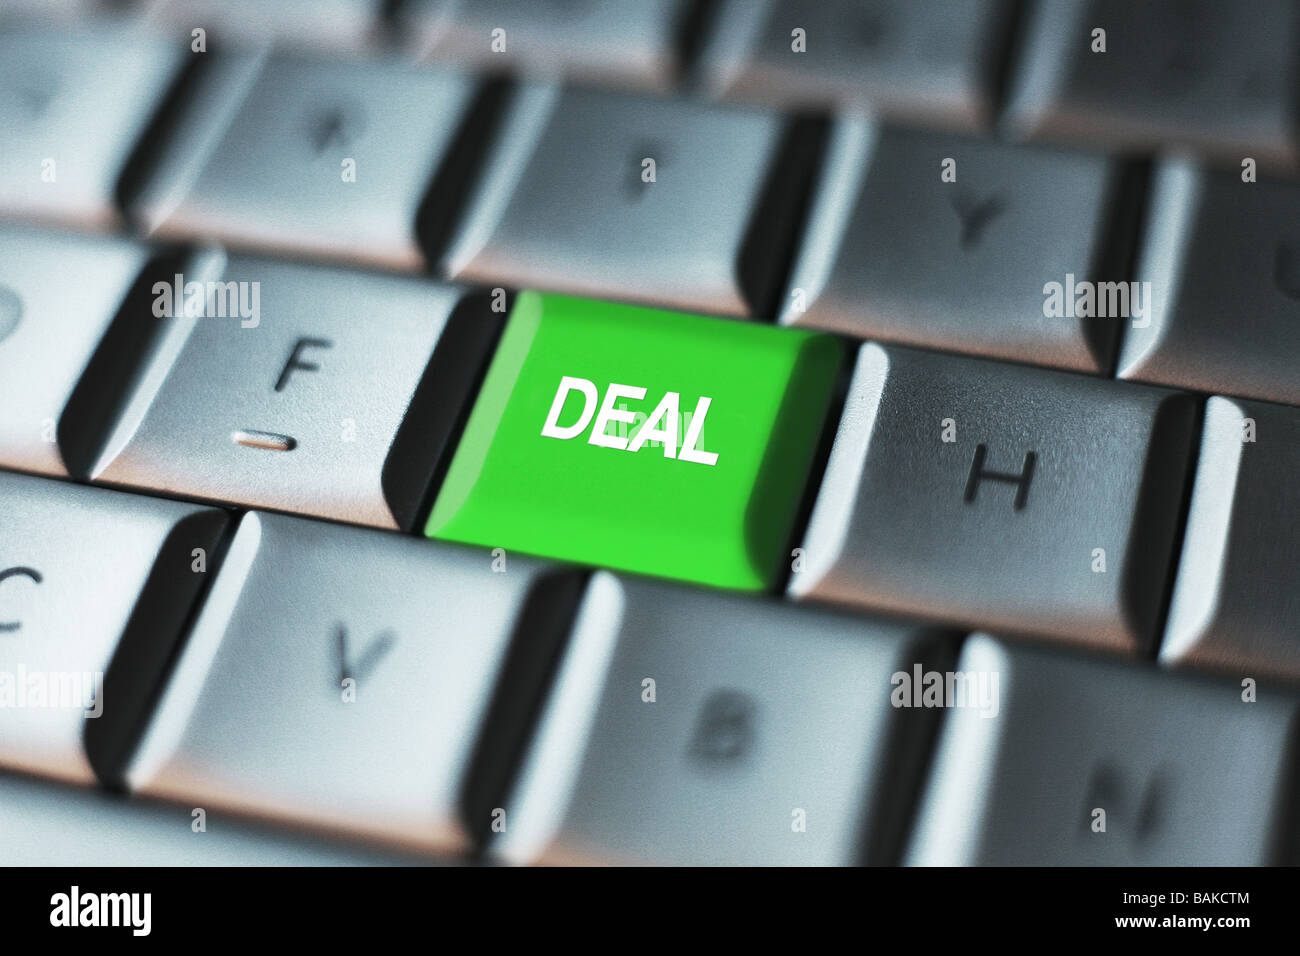 Deal Button on a Computer Key Board Stock Photo